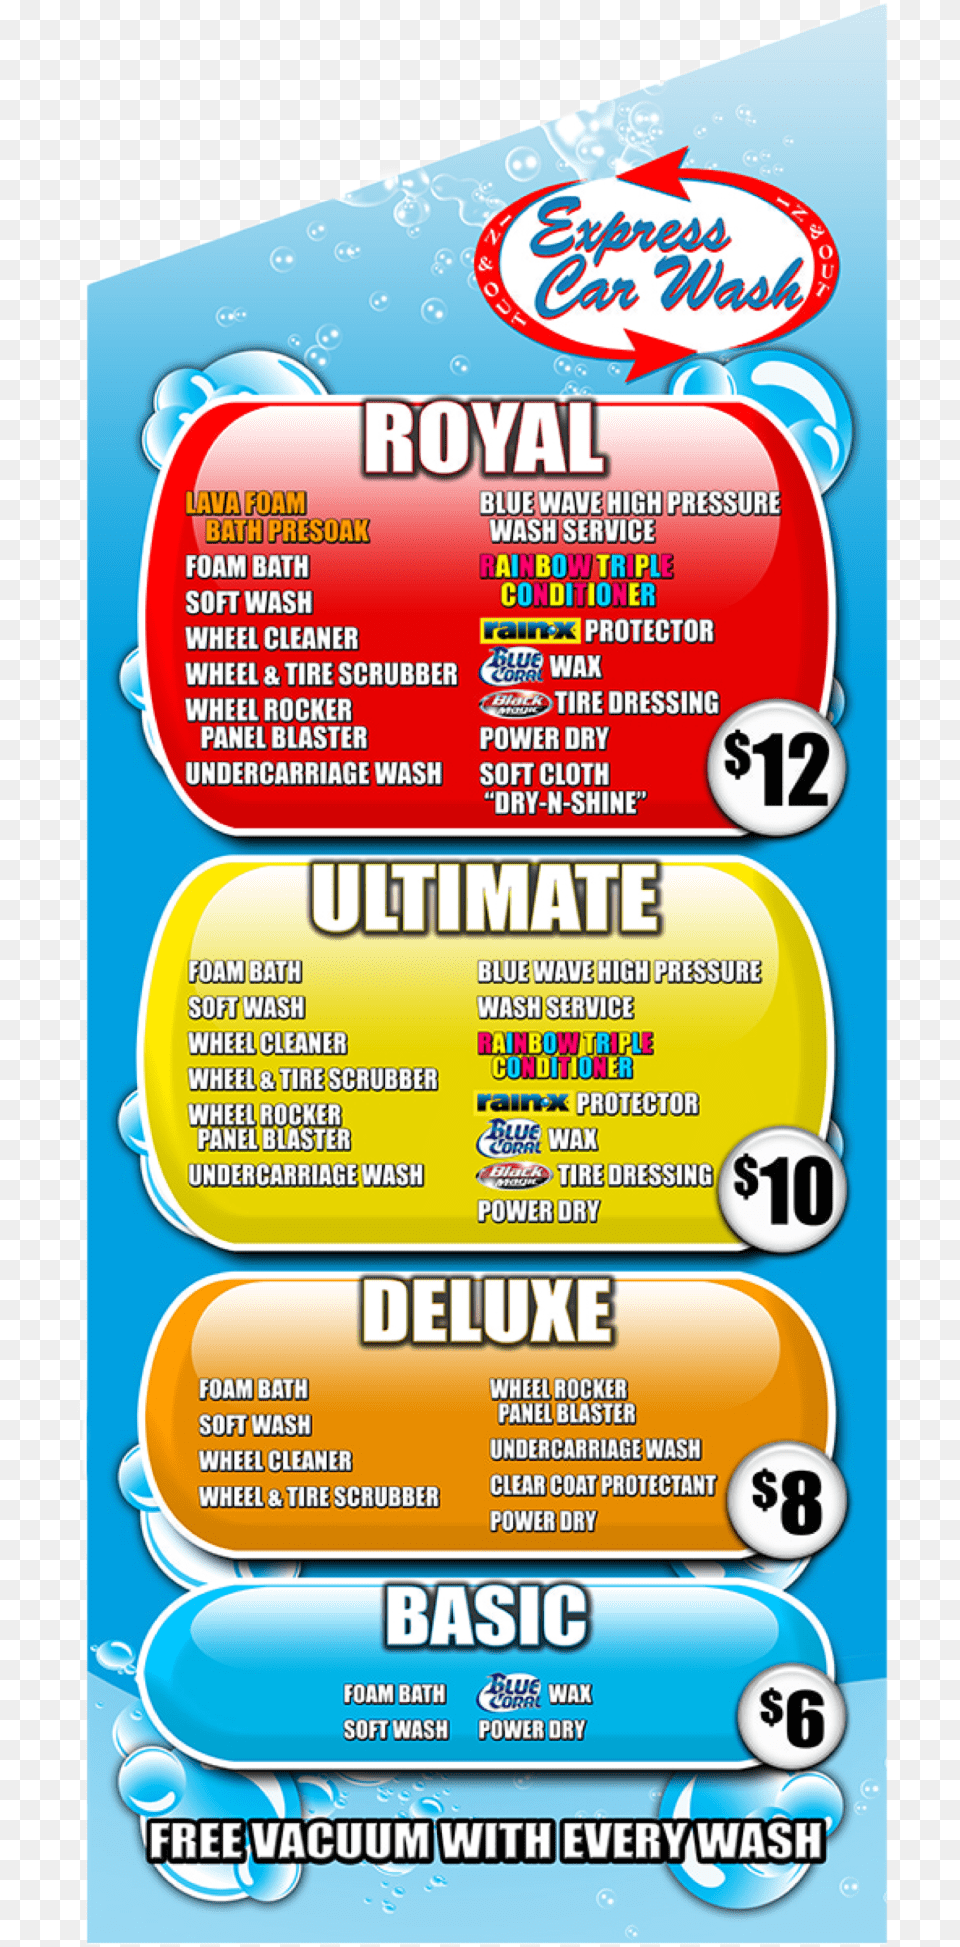 Express Car Wash Options Poster, Advertisement Png